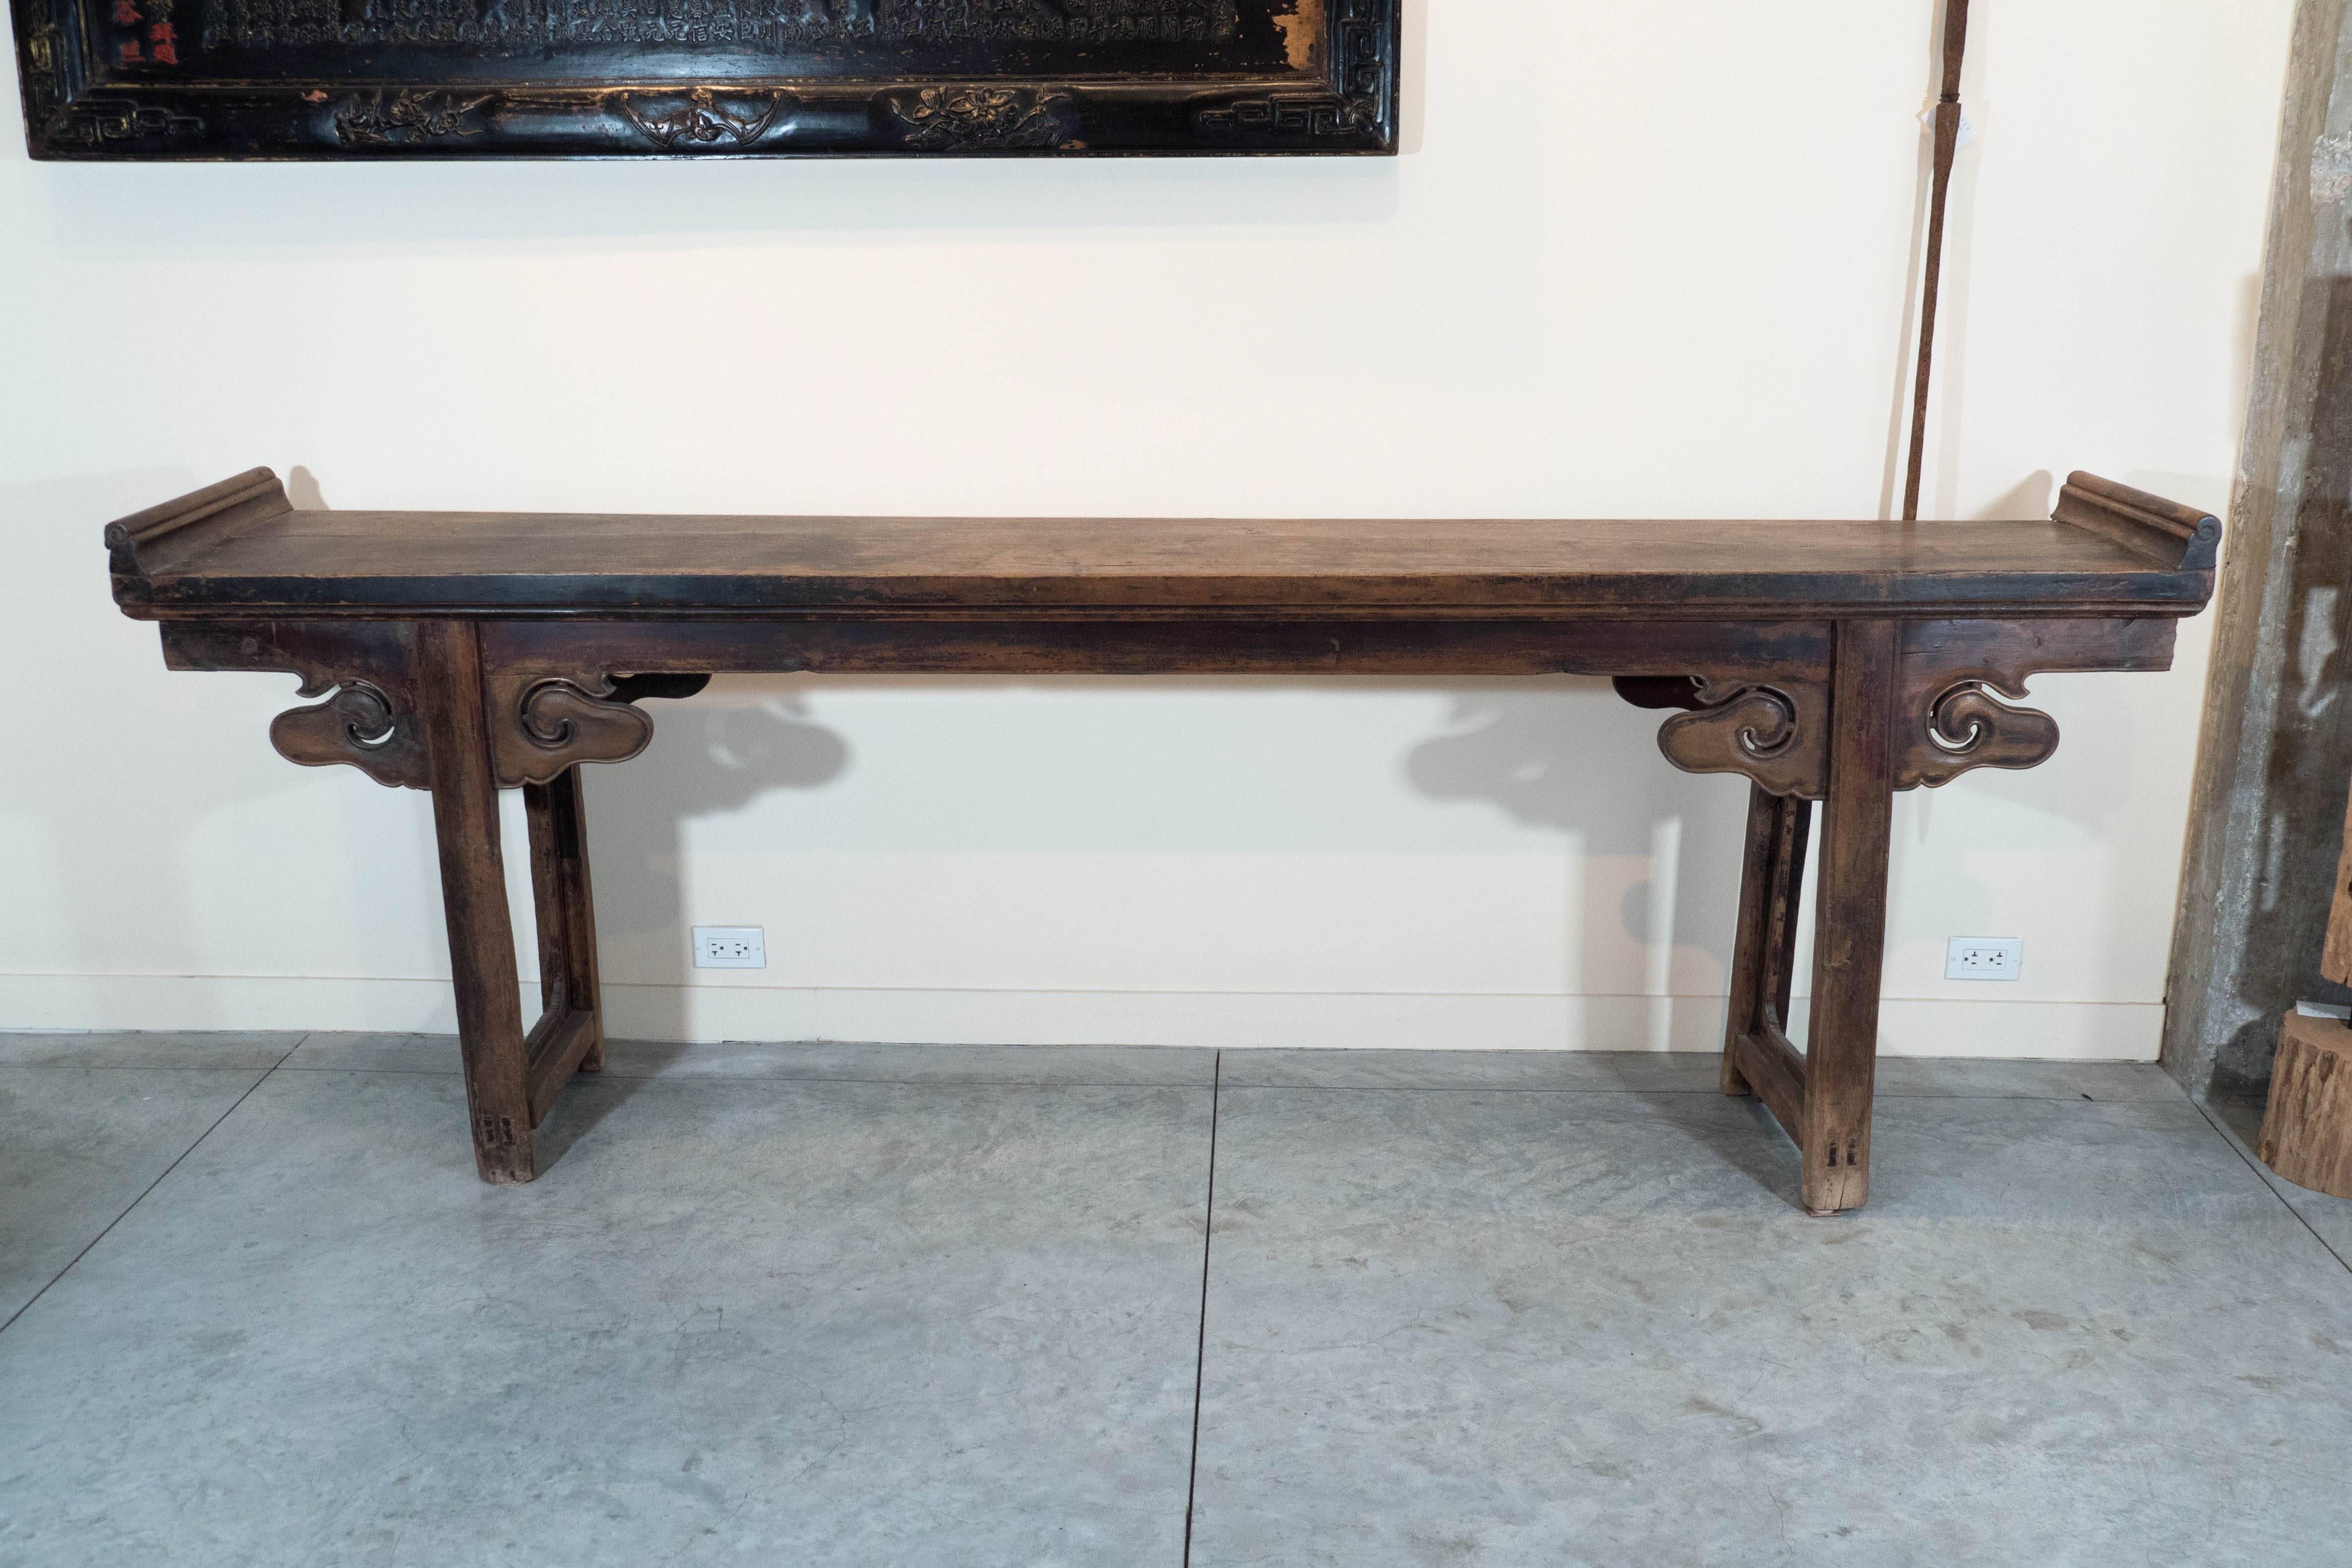 A very large, striking and classically designed 18th century Chinese altar table. This is a very unusual piece that is over 200 years old. It is constructed out of rarely seen and truly gorgeous walnut wood, exhibiting a beautiful patina. At